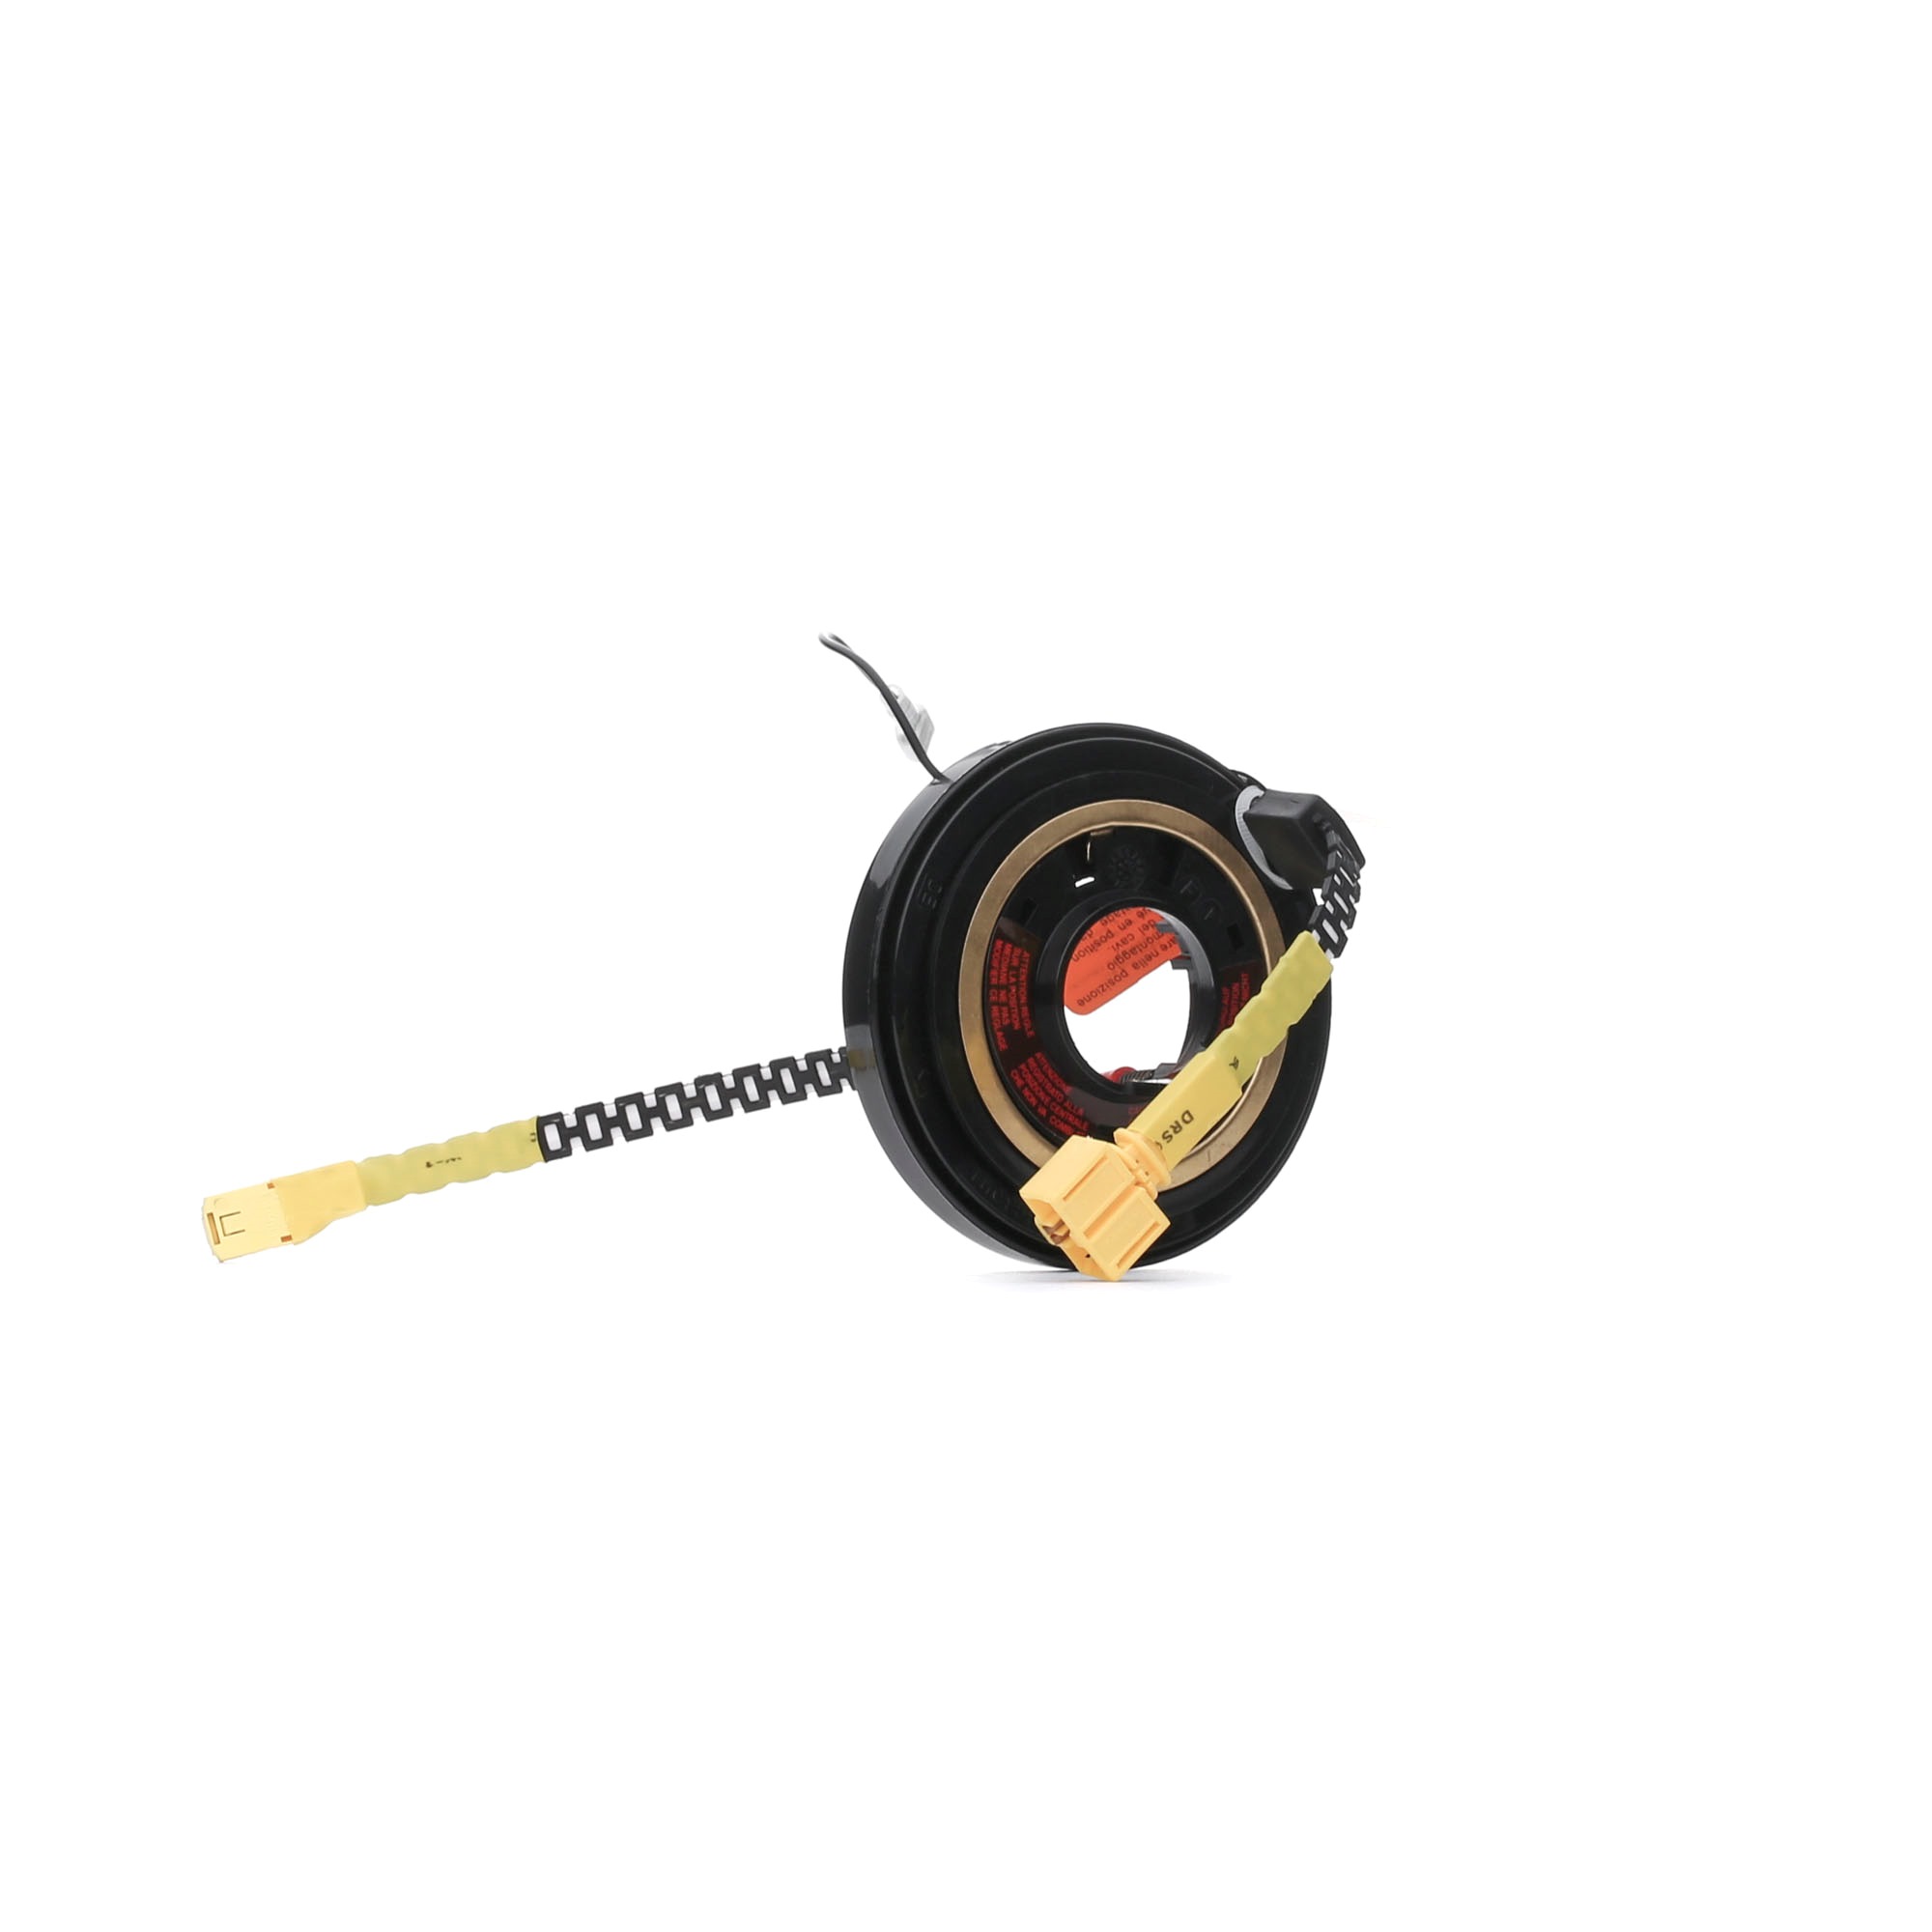 EAS-VW-000 NTY Indicator switch SMART